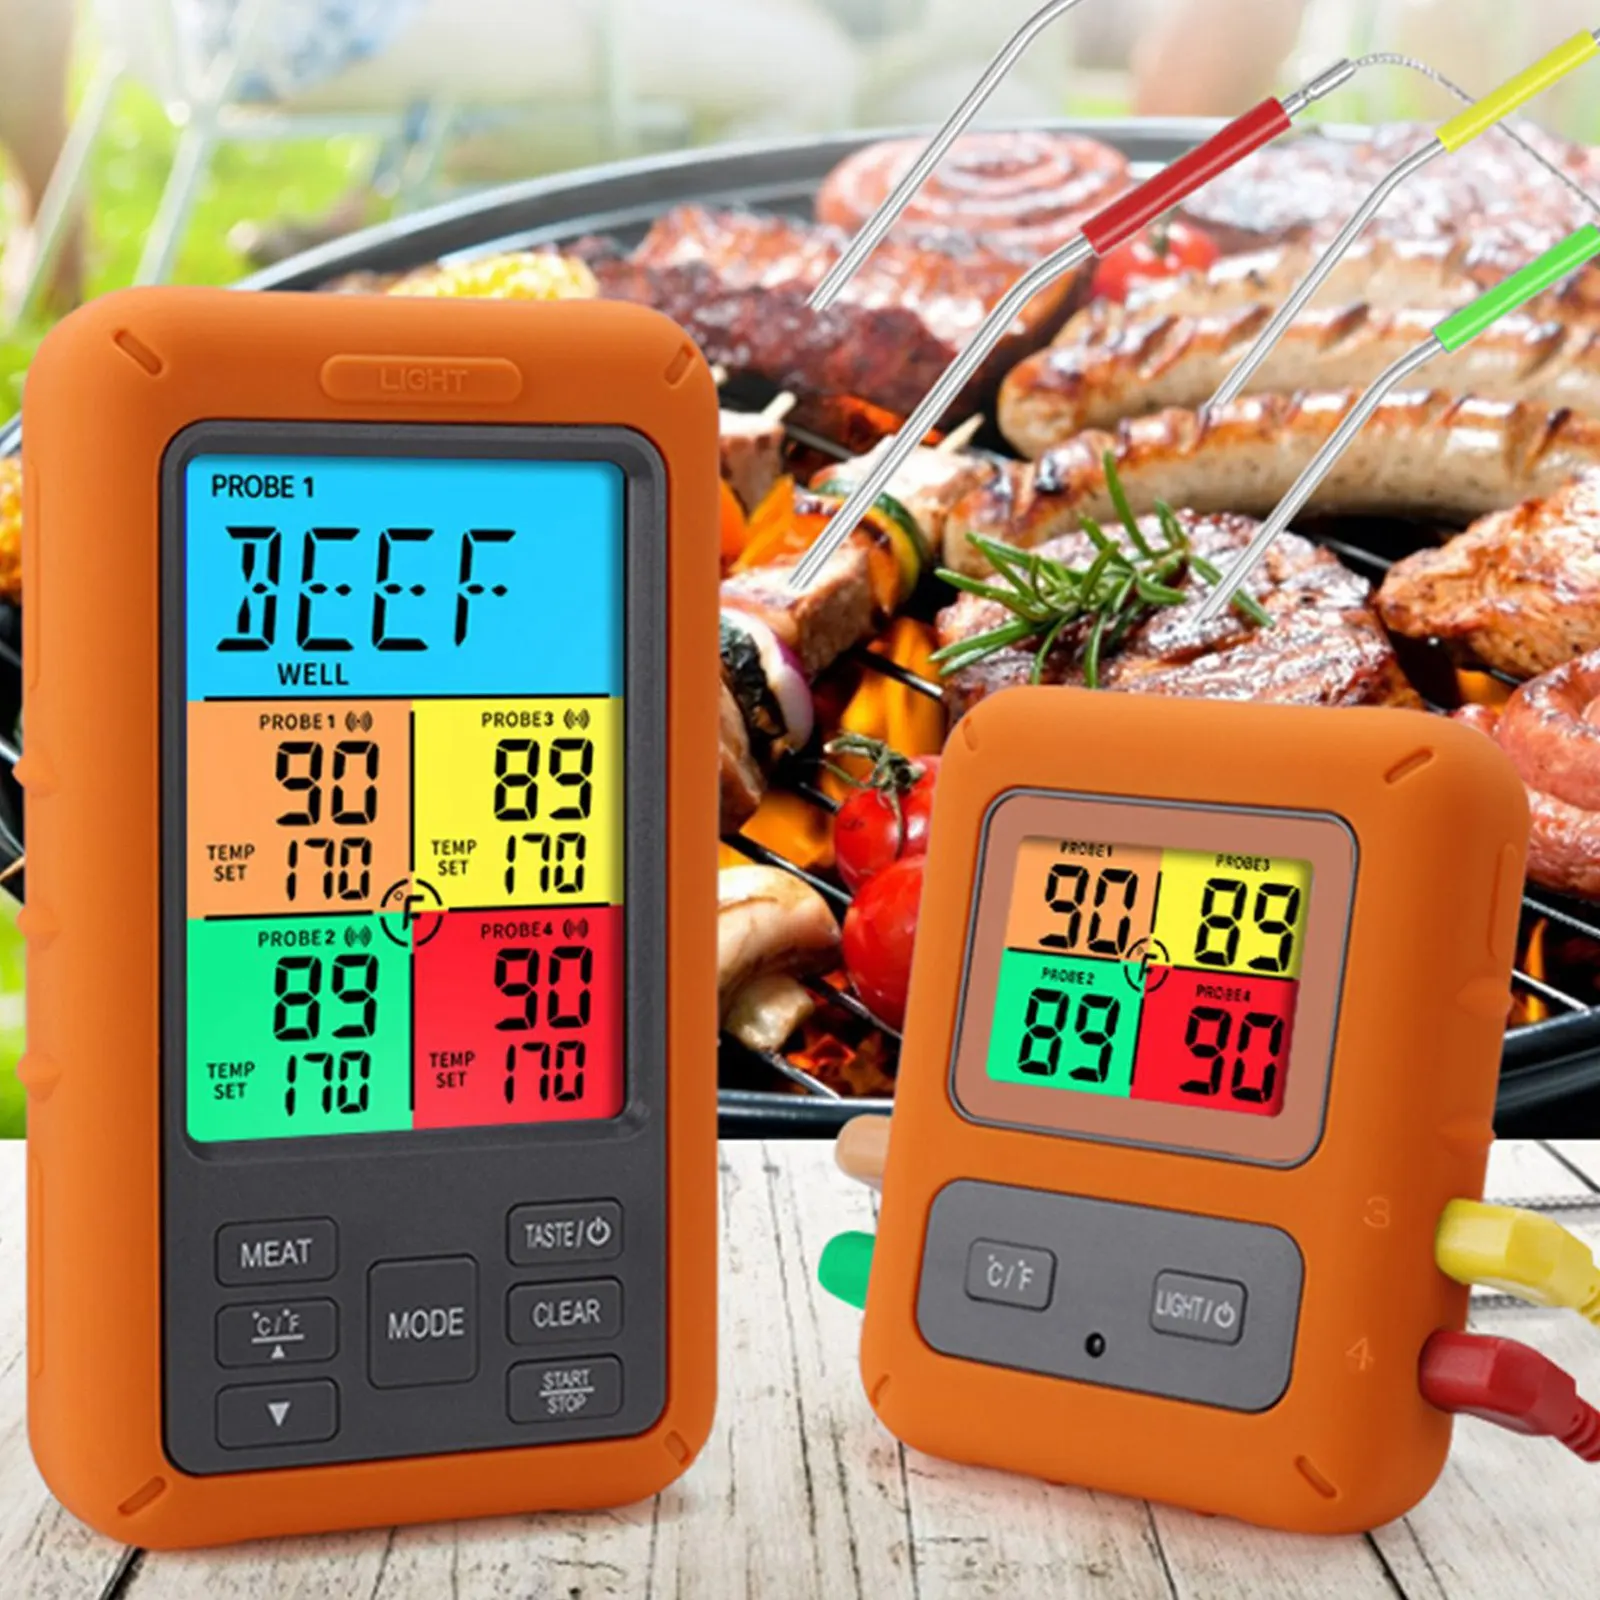 

Barbecue Grill Thermometer Display Temperature Gauge Heat-resistant Portable Outdoor Detector Timer Meter